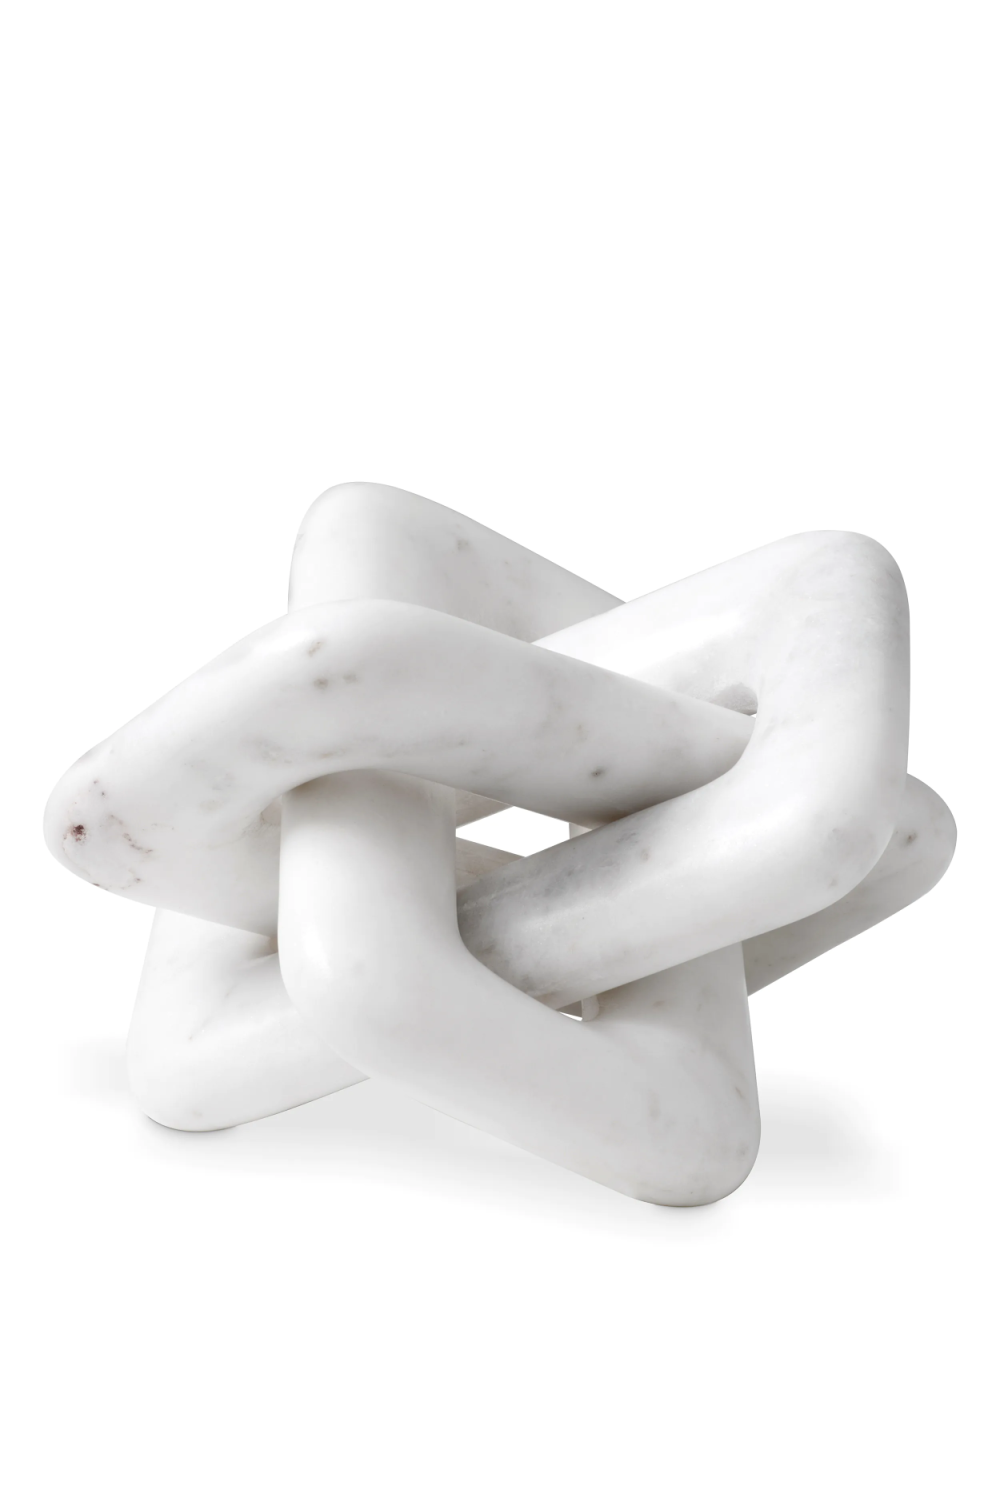 Glimpse & Hollow Marble Chain Link Decor - Modern Decorative Objects, Marble  Decor, White Marble Home Decor | Marble Figurines, Knick Knacks Home Decor  | Marble Office Decor, White Home Decor |